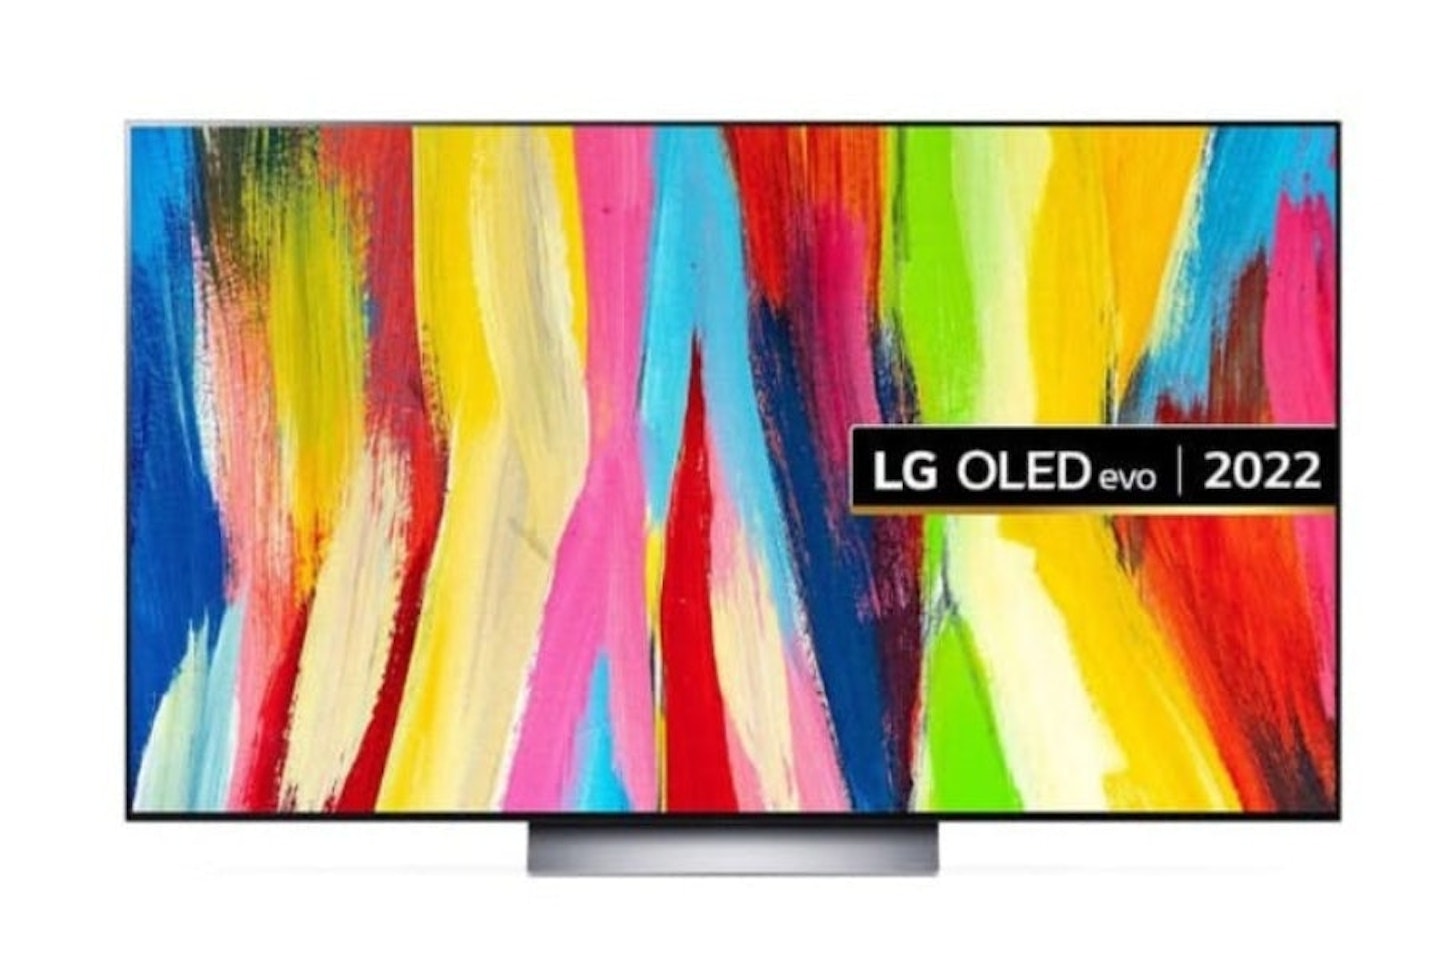 LG C2 55-inch 4K Smart OLED TV - one of the best 4K TVs for Xbox series X